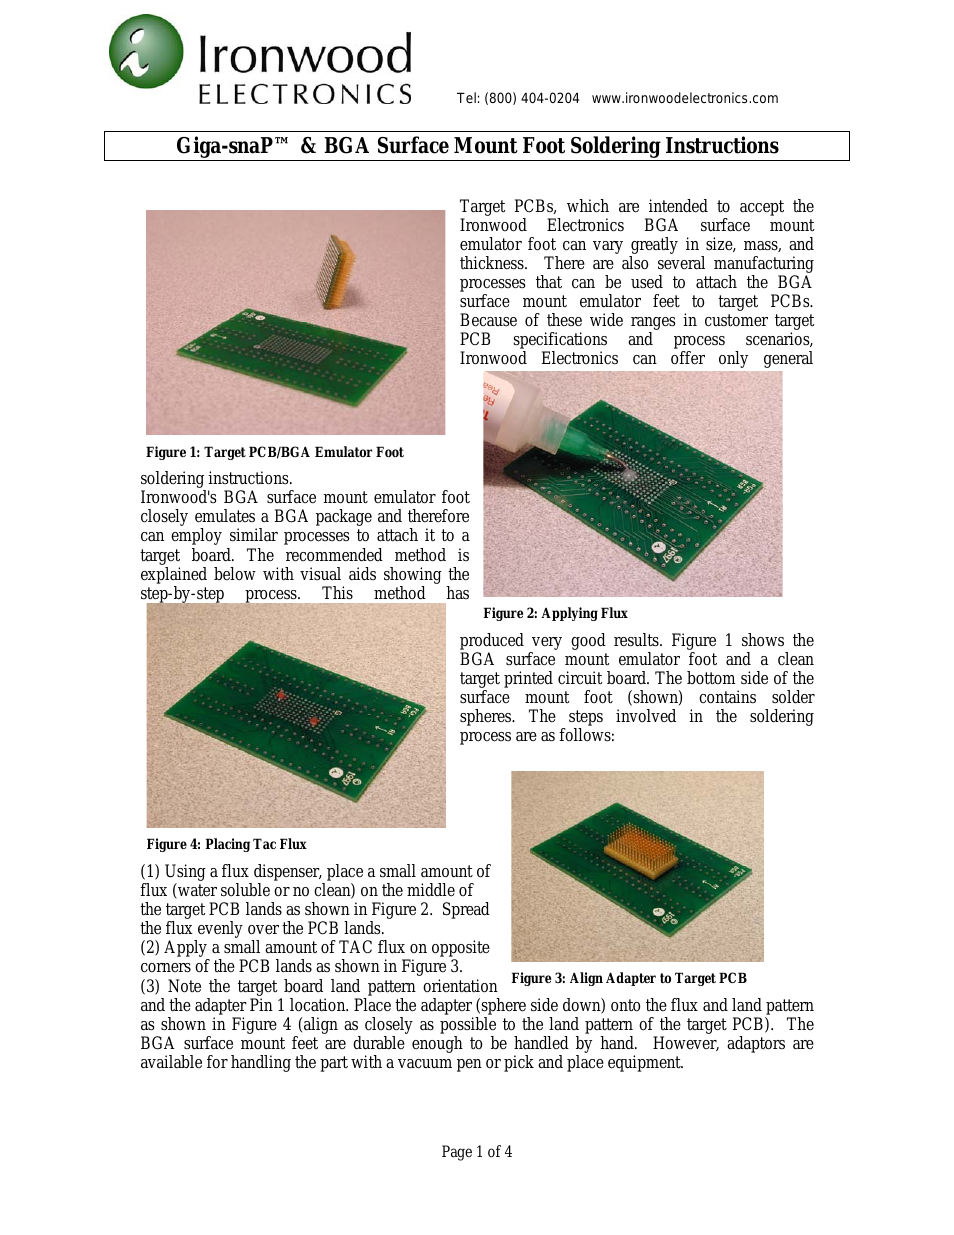 GigaSnap and BGA Surface Mount Foot soldering instructions